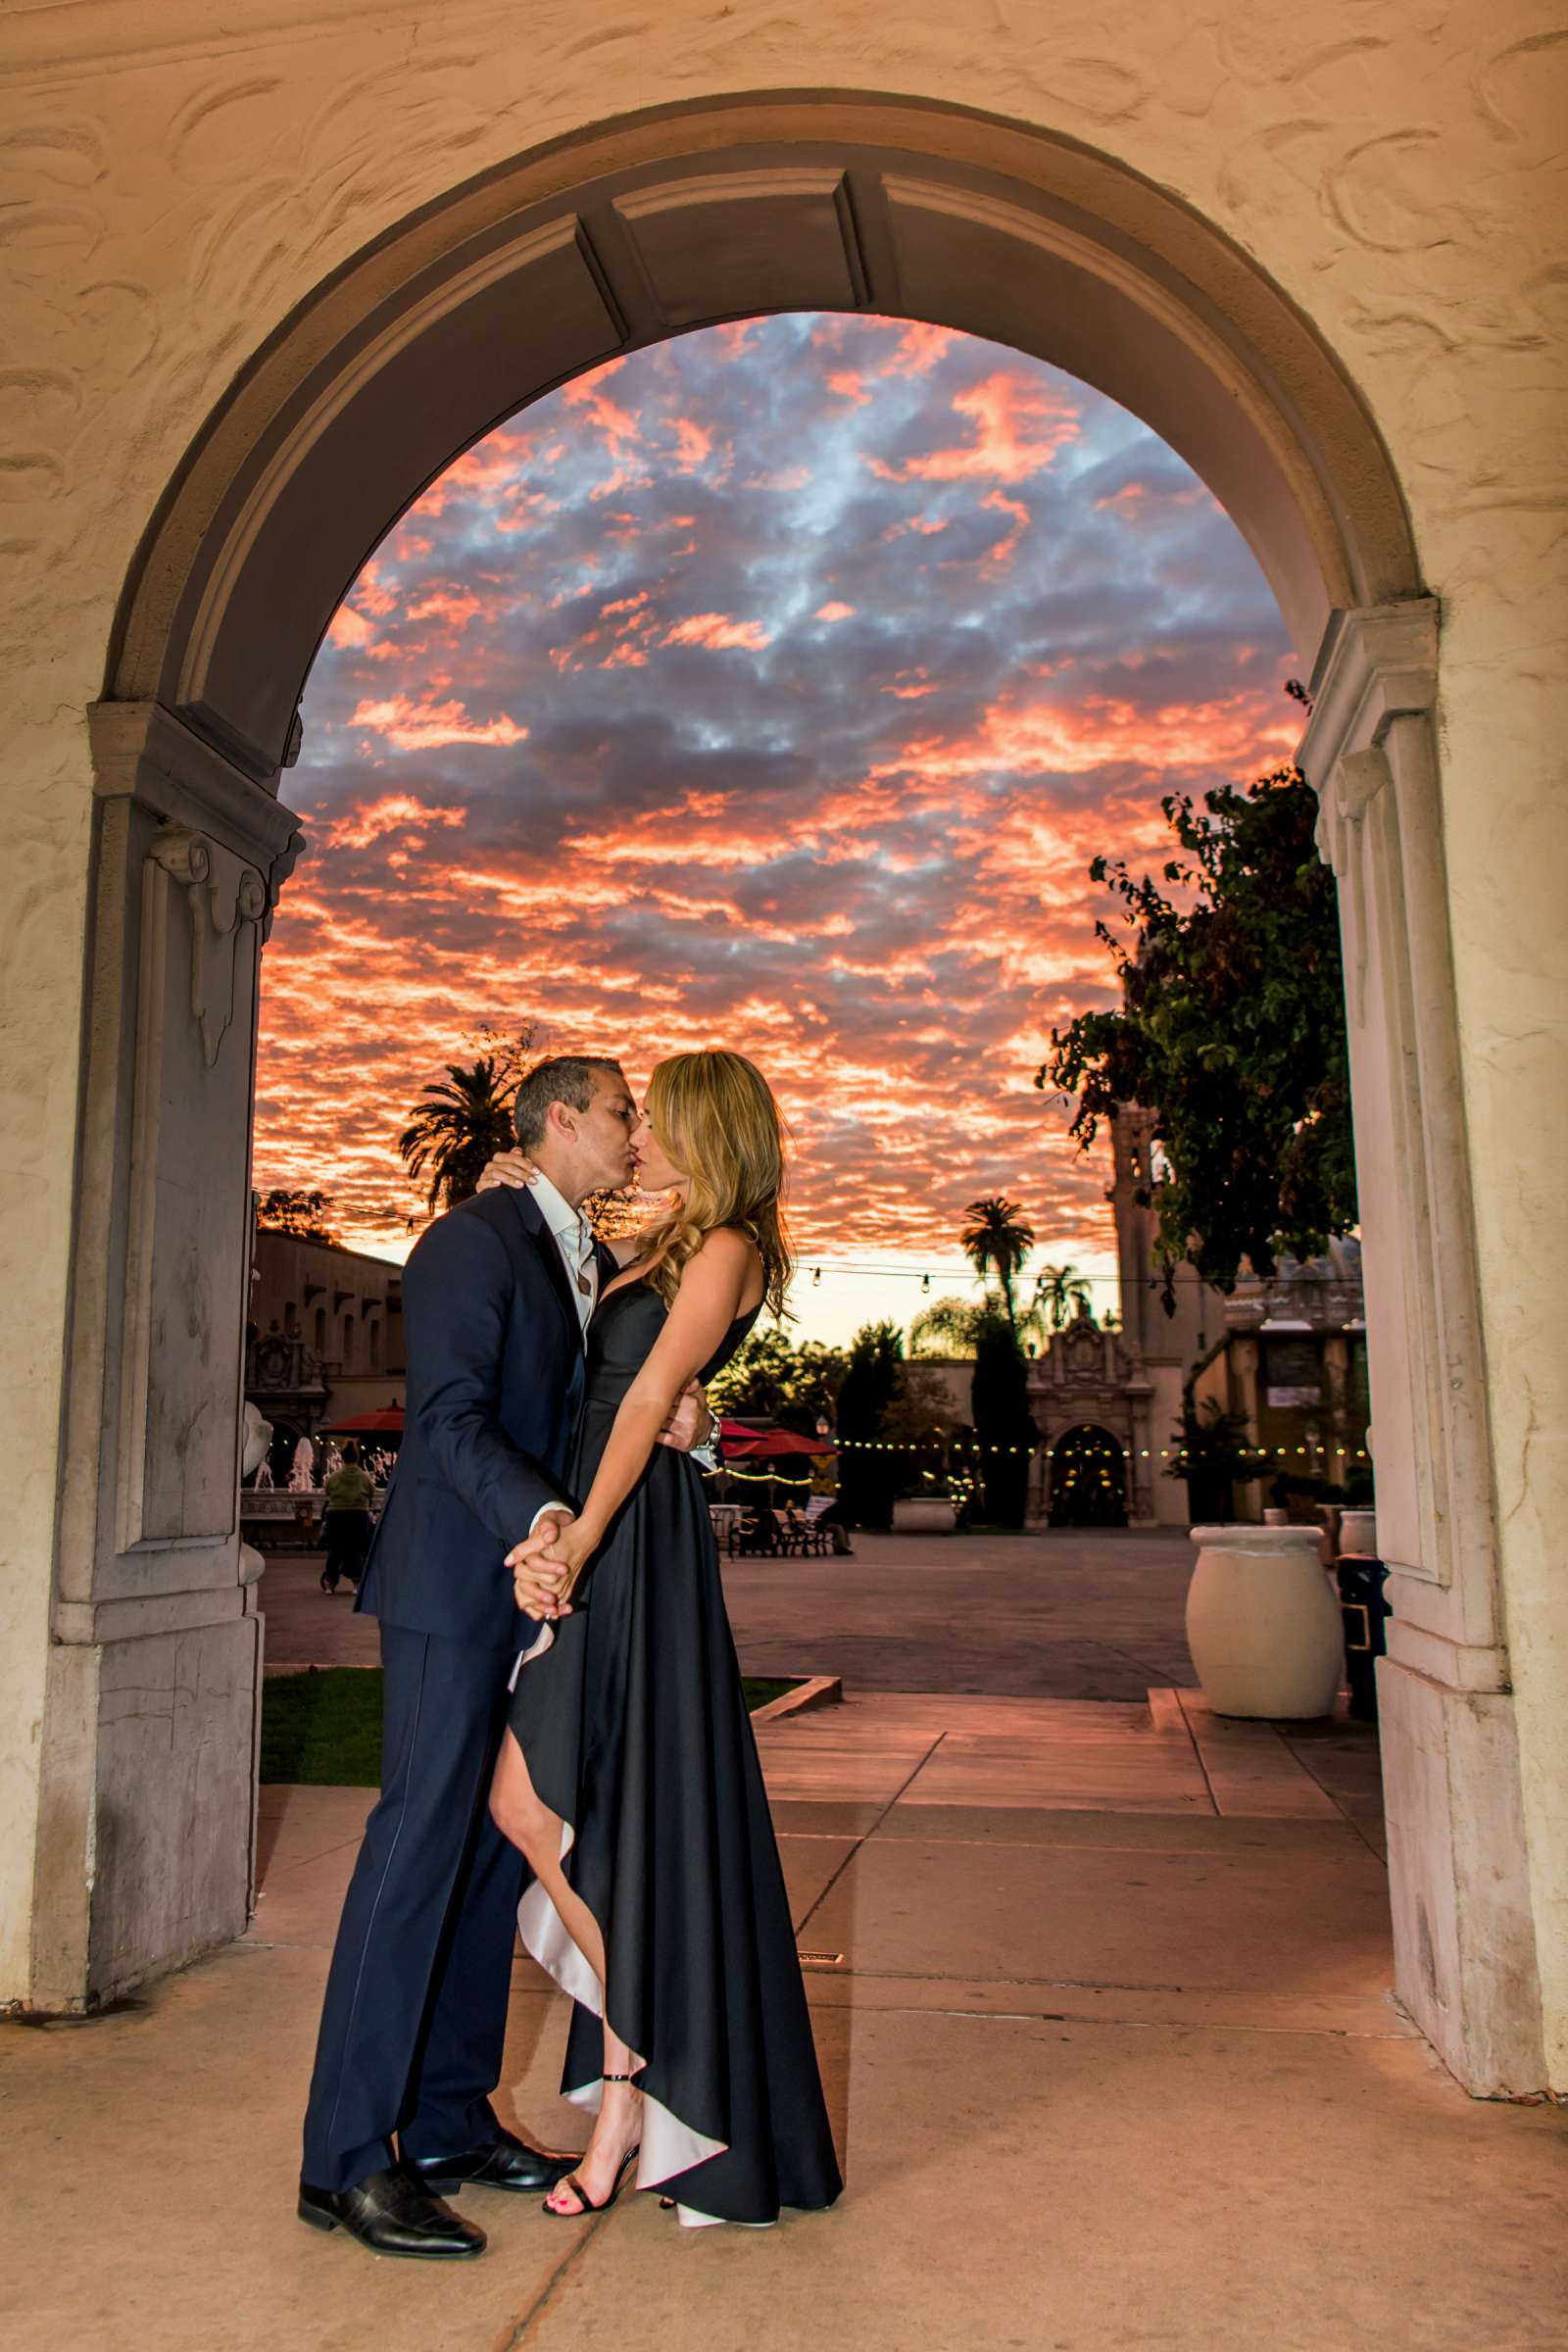 Sunset at Engagement, Priscilla and Richard Engagement Photo #1 by True Photography